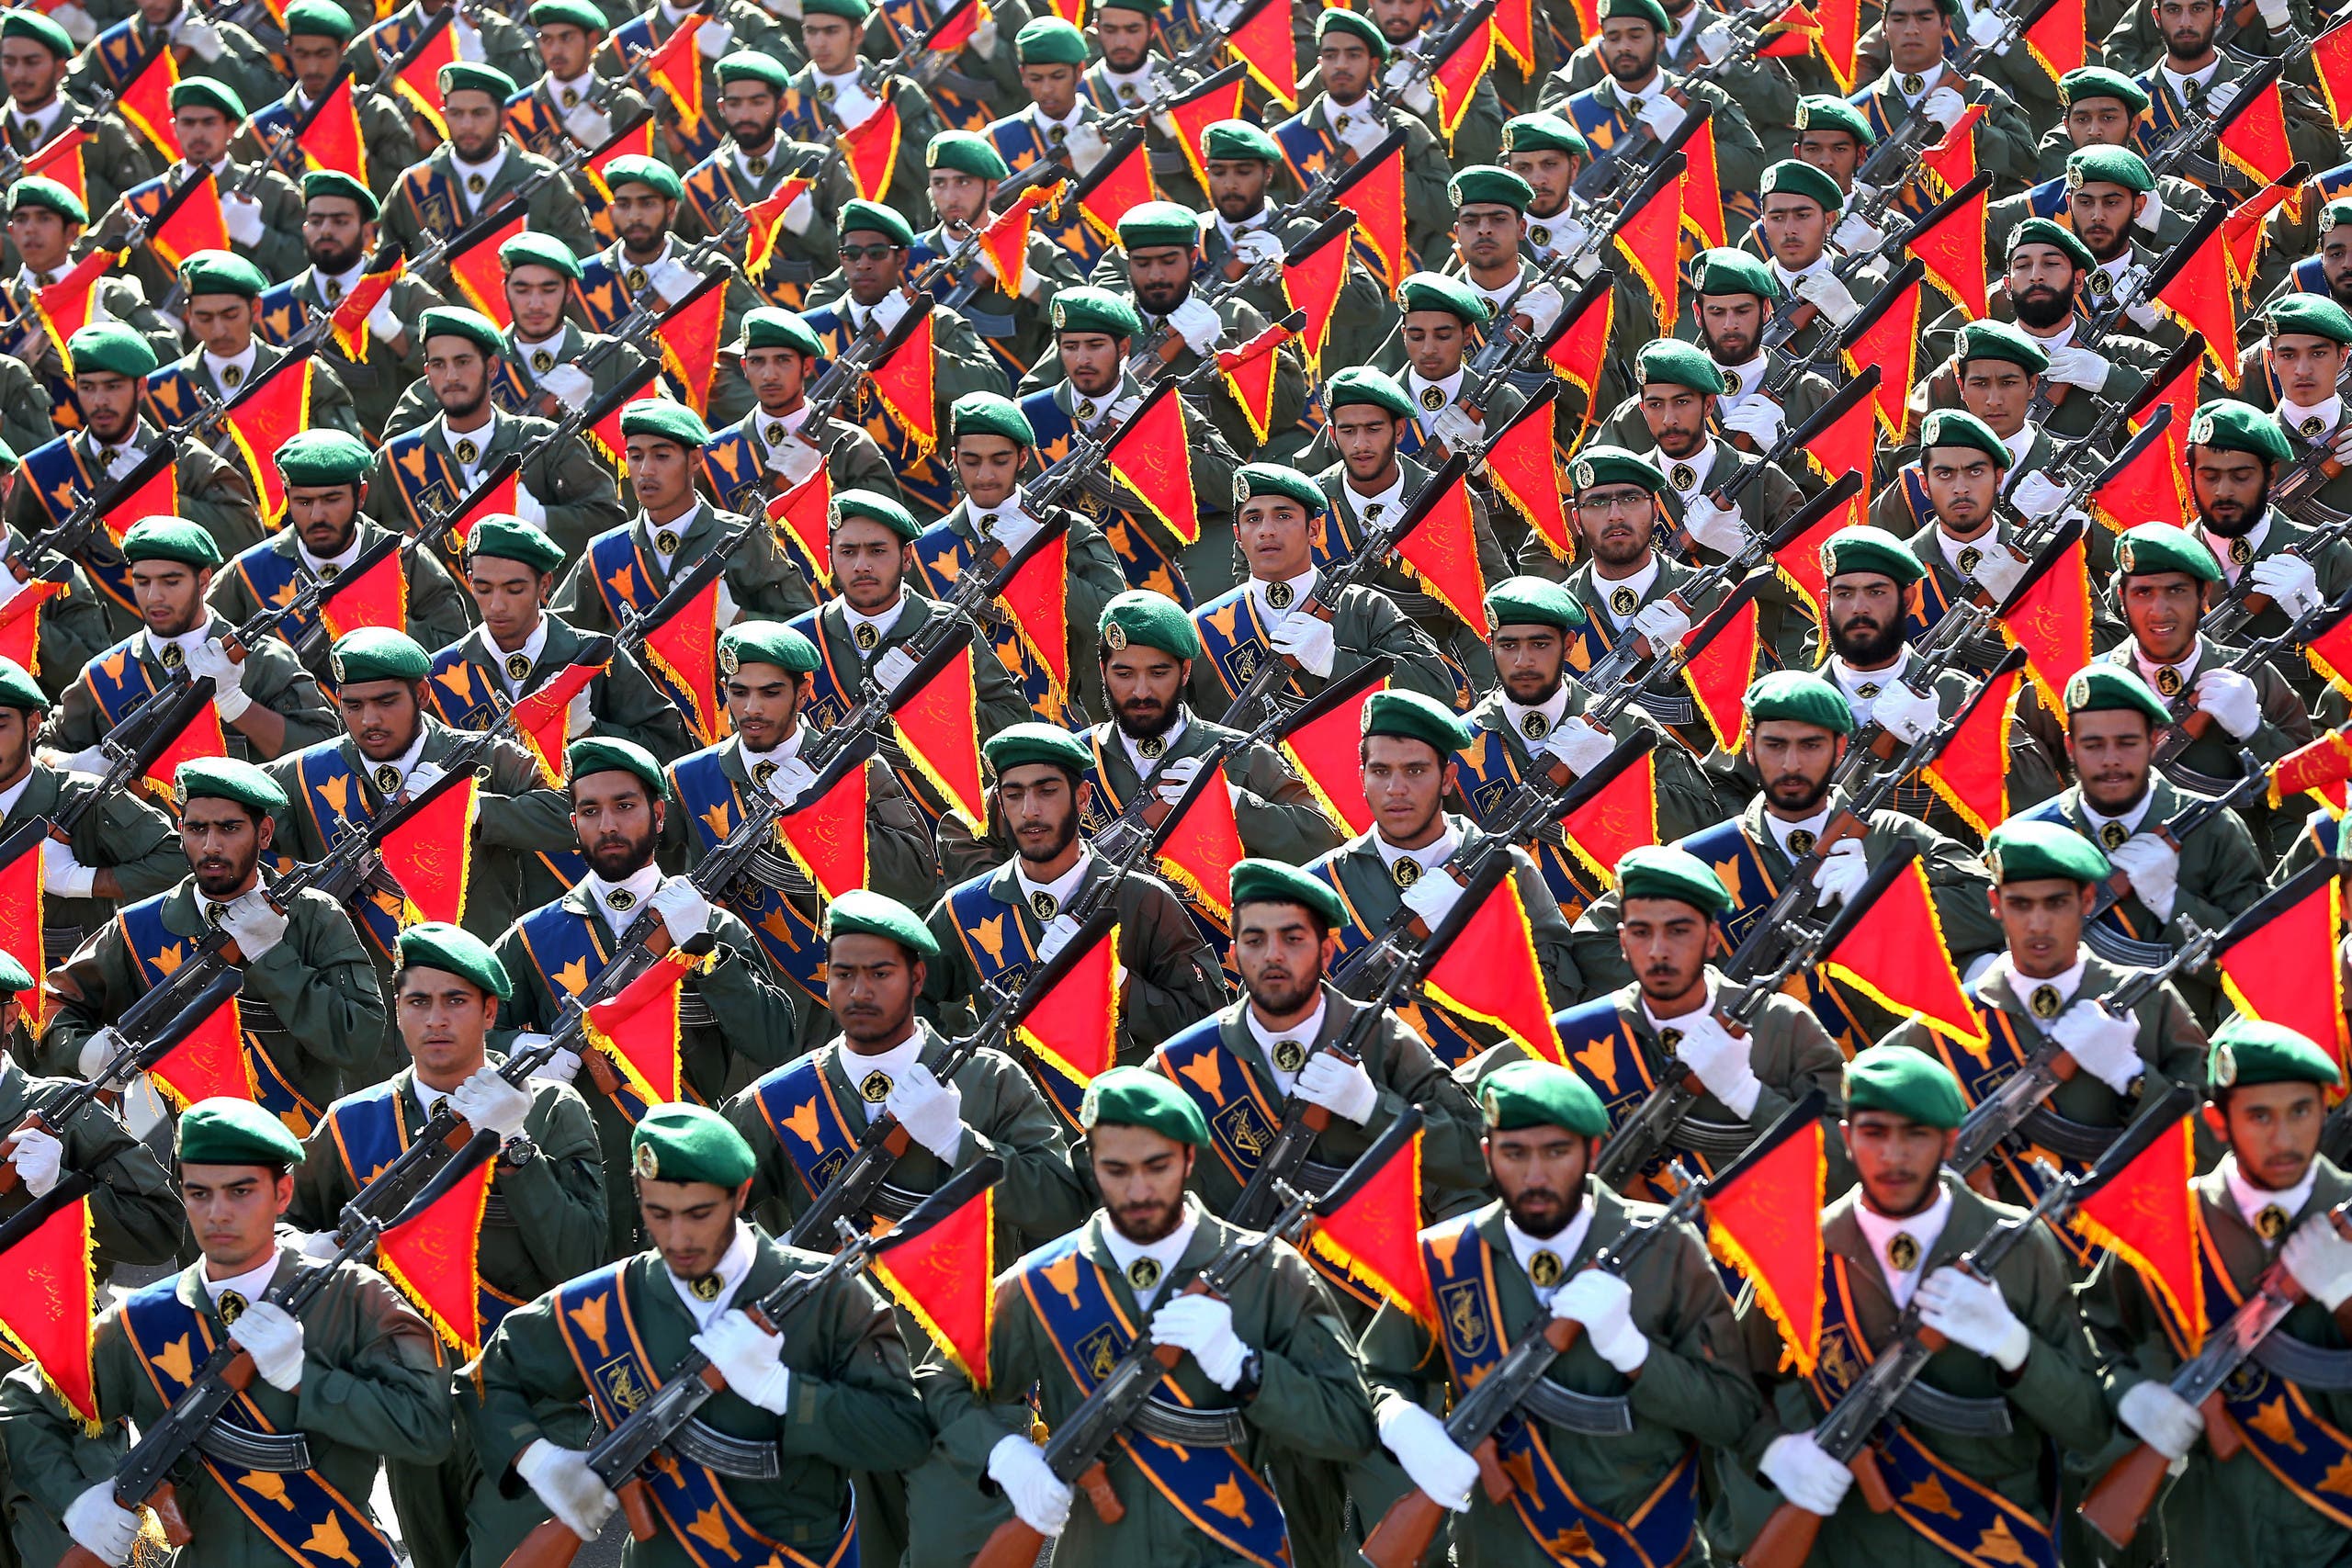 Iran's Revolutionary Guard troops march in a military parade marking the 36th anniversary of Iraq's 1980 invasion of Iran, in front of the shrine of late revolutionary founder Ayatollah Khomeini, just outside Tehran, Iran, Wednesday, Sept. 21, 2016. (AP)